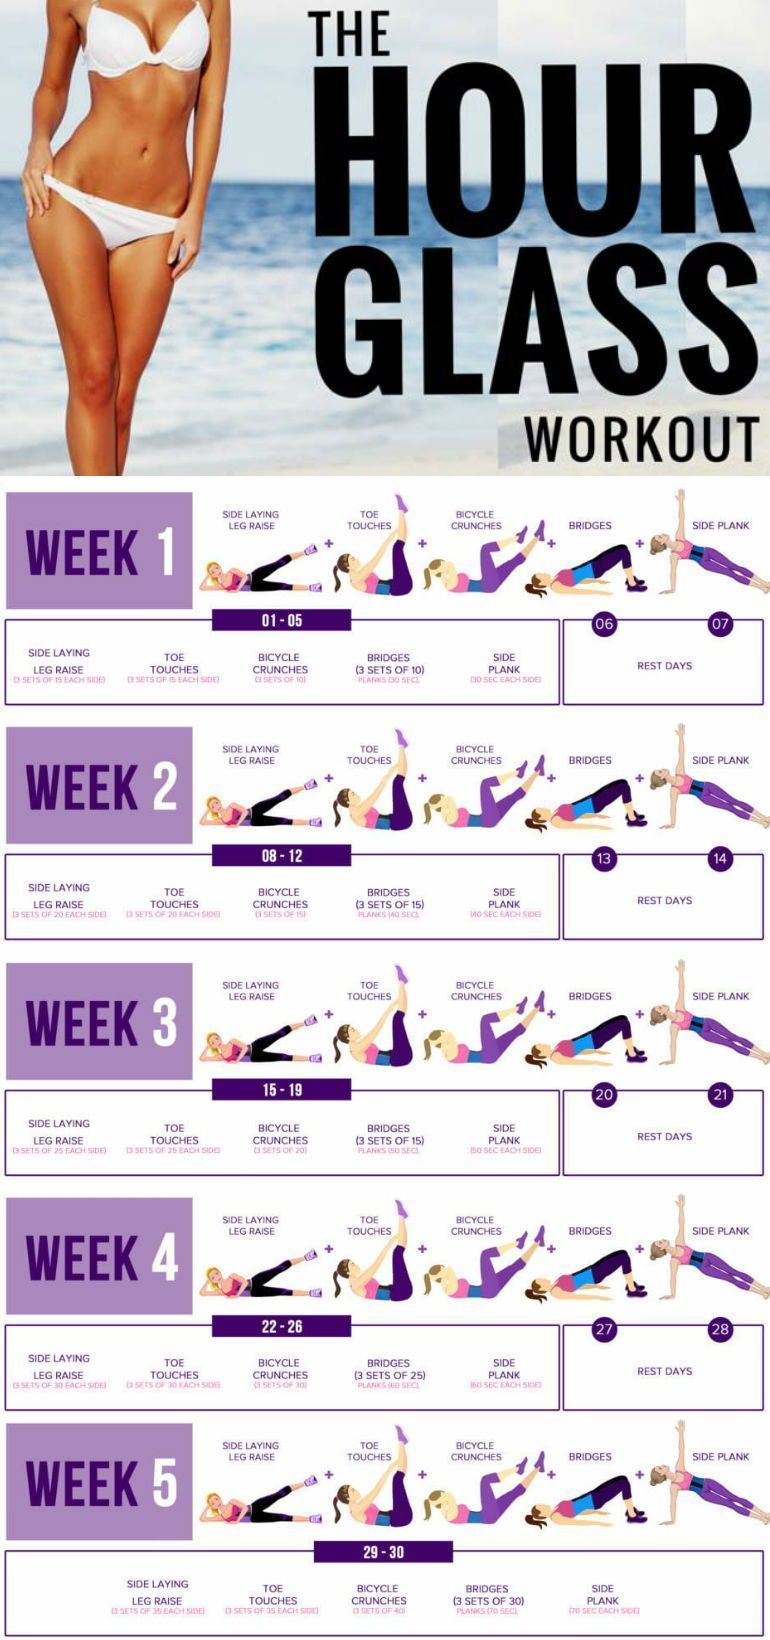 5 Moves To Shape Your Body Into A Beautiful Hour Glass Figure - GymGuider.com -   19 workouts to lose belly fat fast ideas